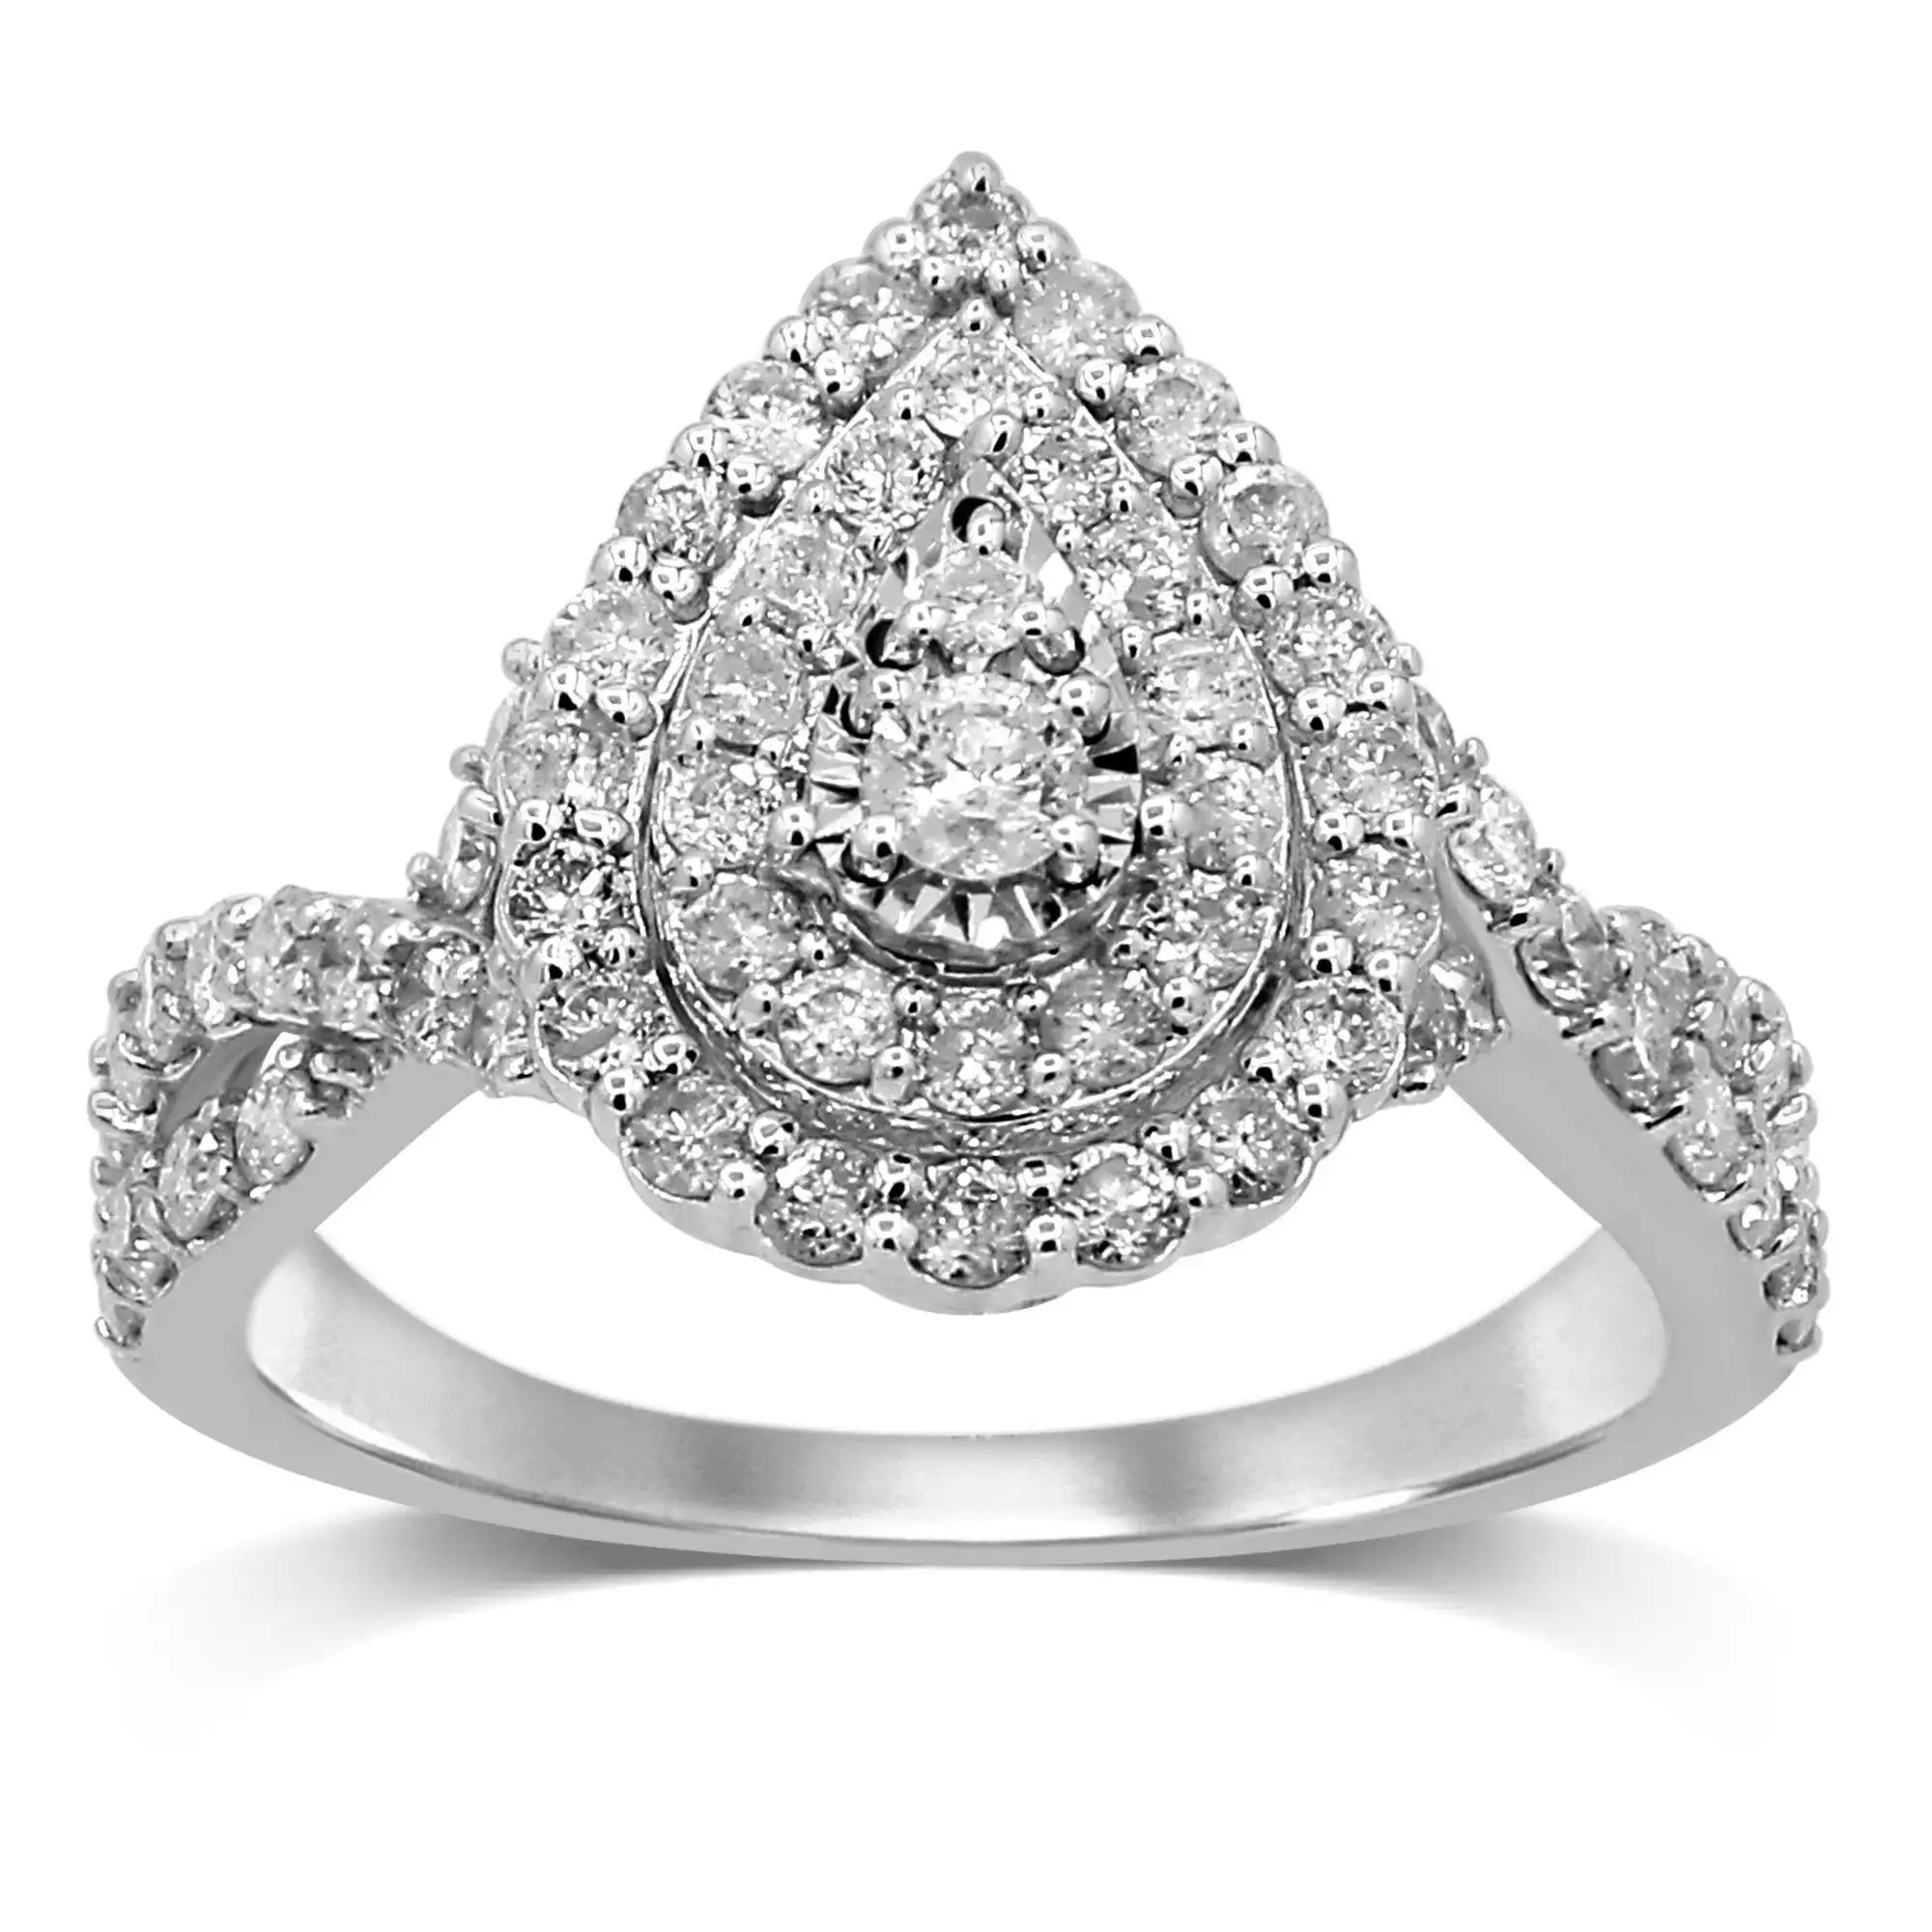 Double Halo pear shaped ring with 1.00ct of Diamonds in 9ct White Gold